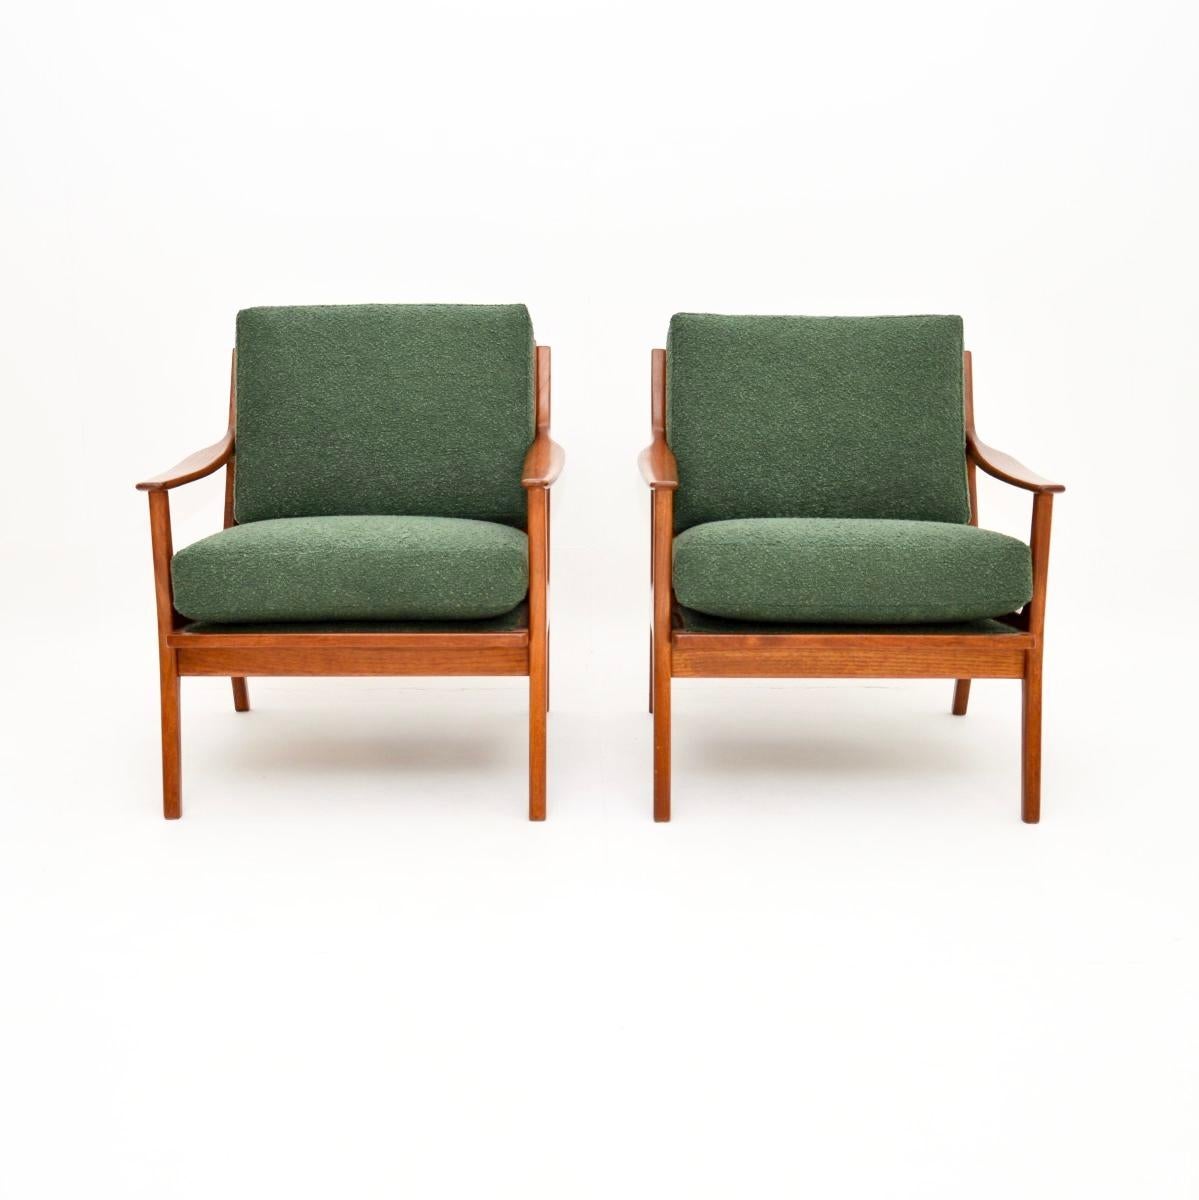 A stylish and extremely well made pair of vintage Danish teak armchairs. They were recently imported from Denmark, they date from the 1960’s.

The quality is outstanding, they are beautifully designed and they are very comfortable. The solid teak